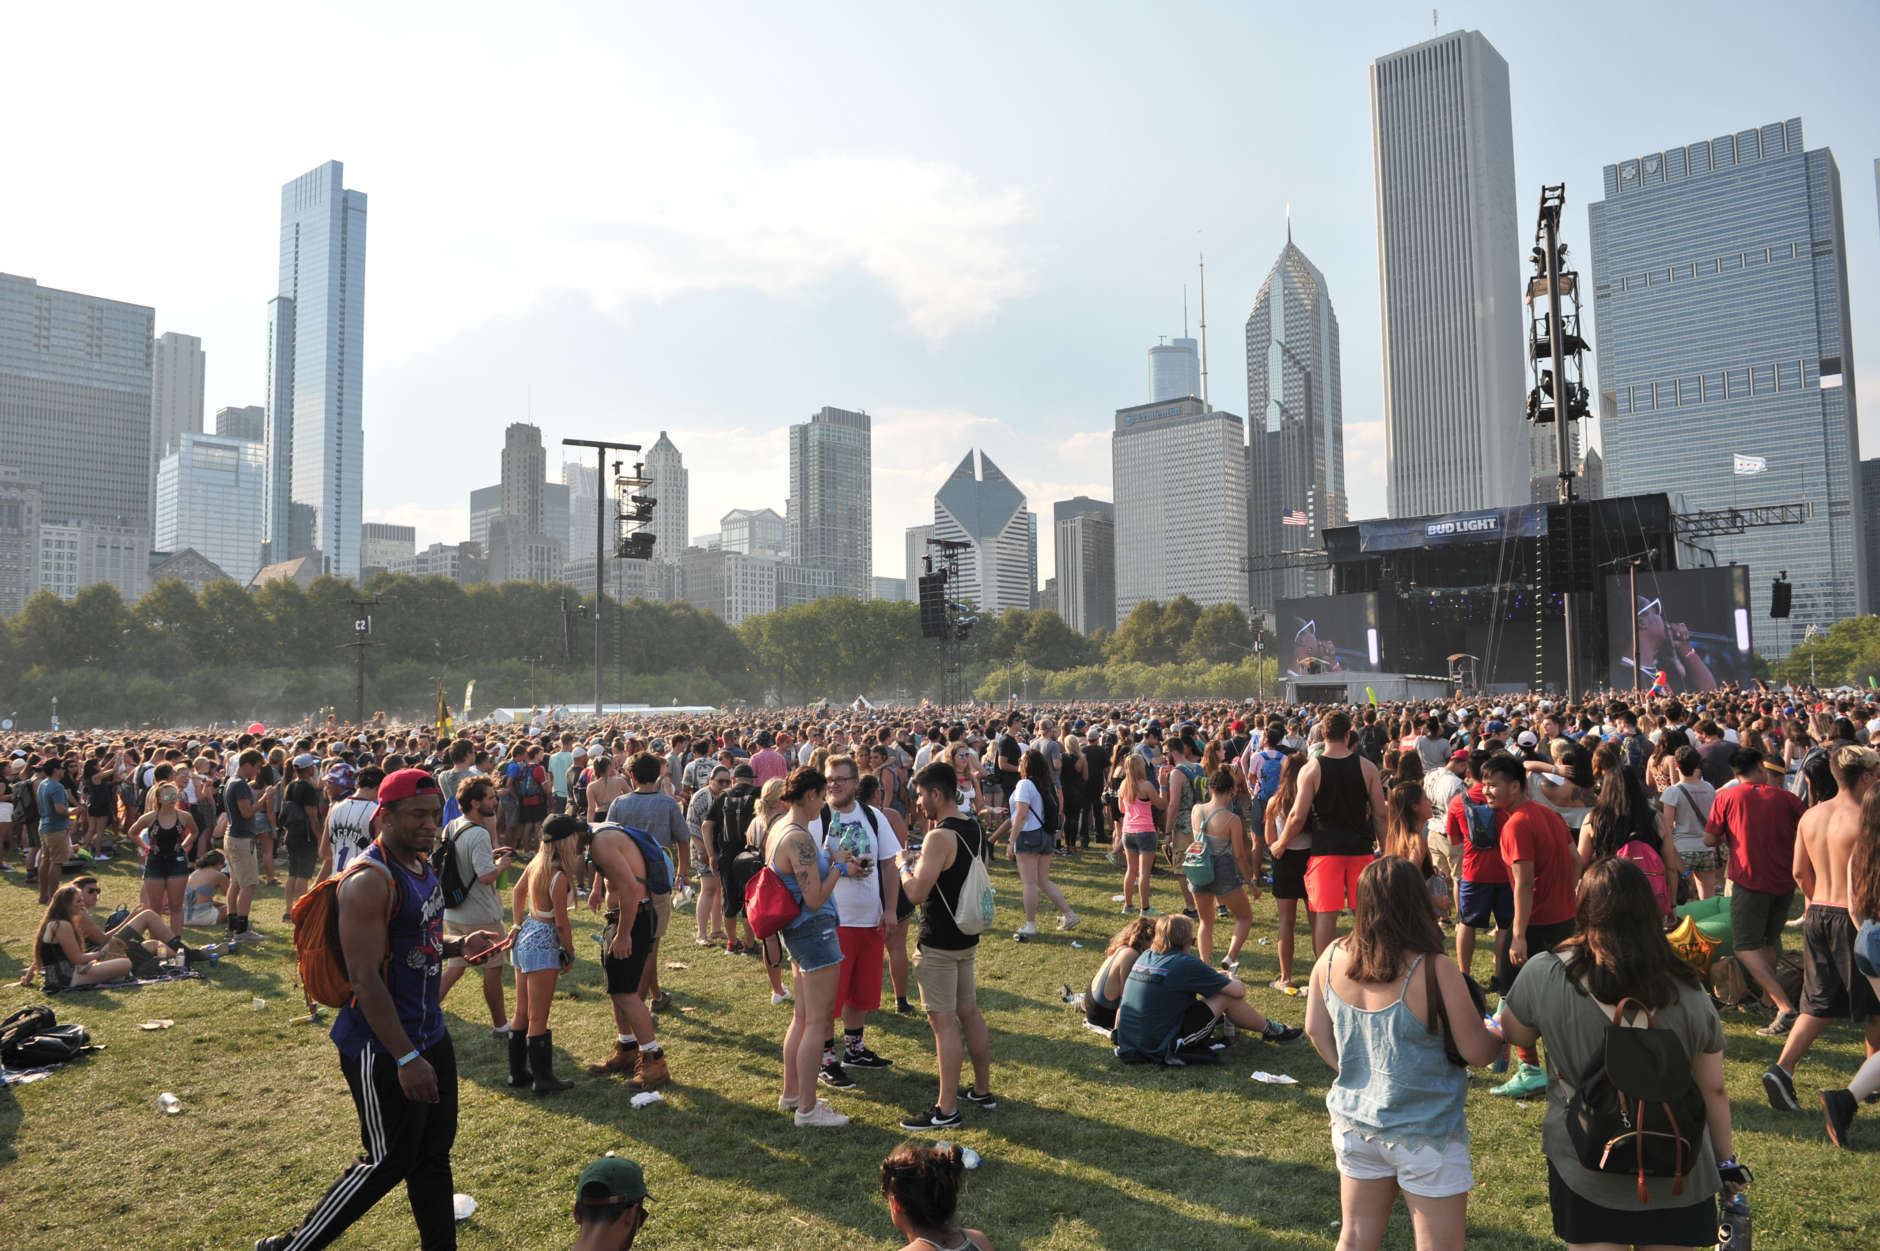 Atmosphere on day one at Lollapalooza in Grant Park on Thursday, Aug 3, 2017 in Chicago. (Photo by Rob Grabowski/Invision/AP)